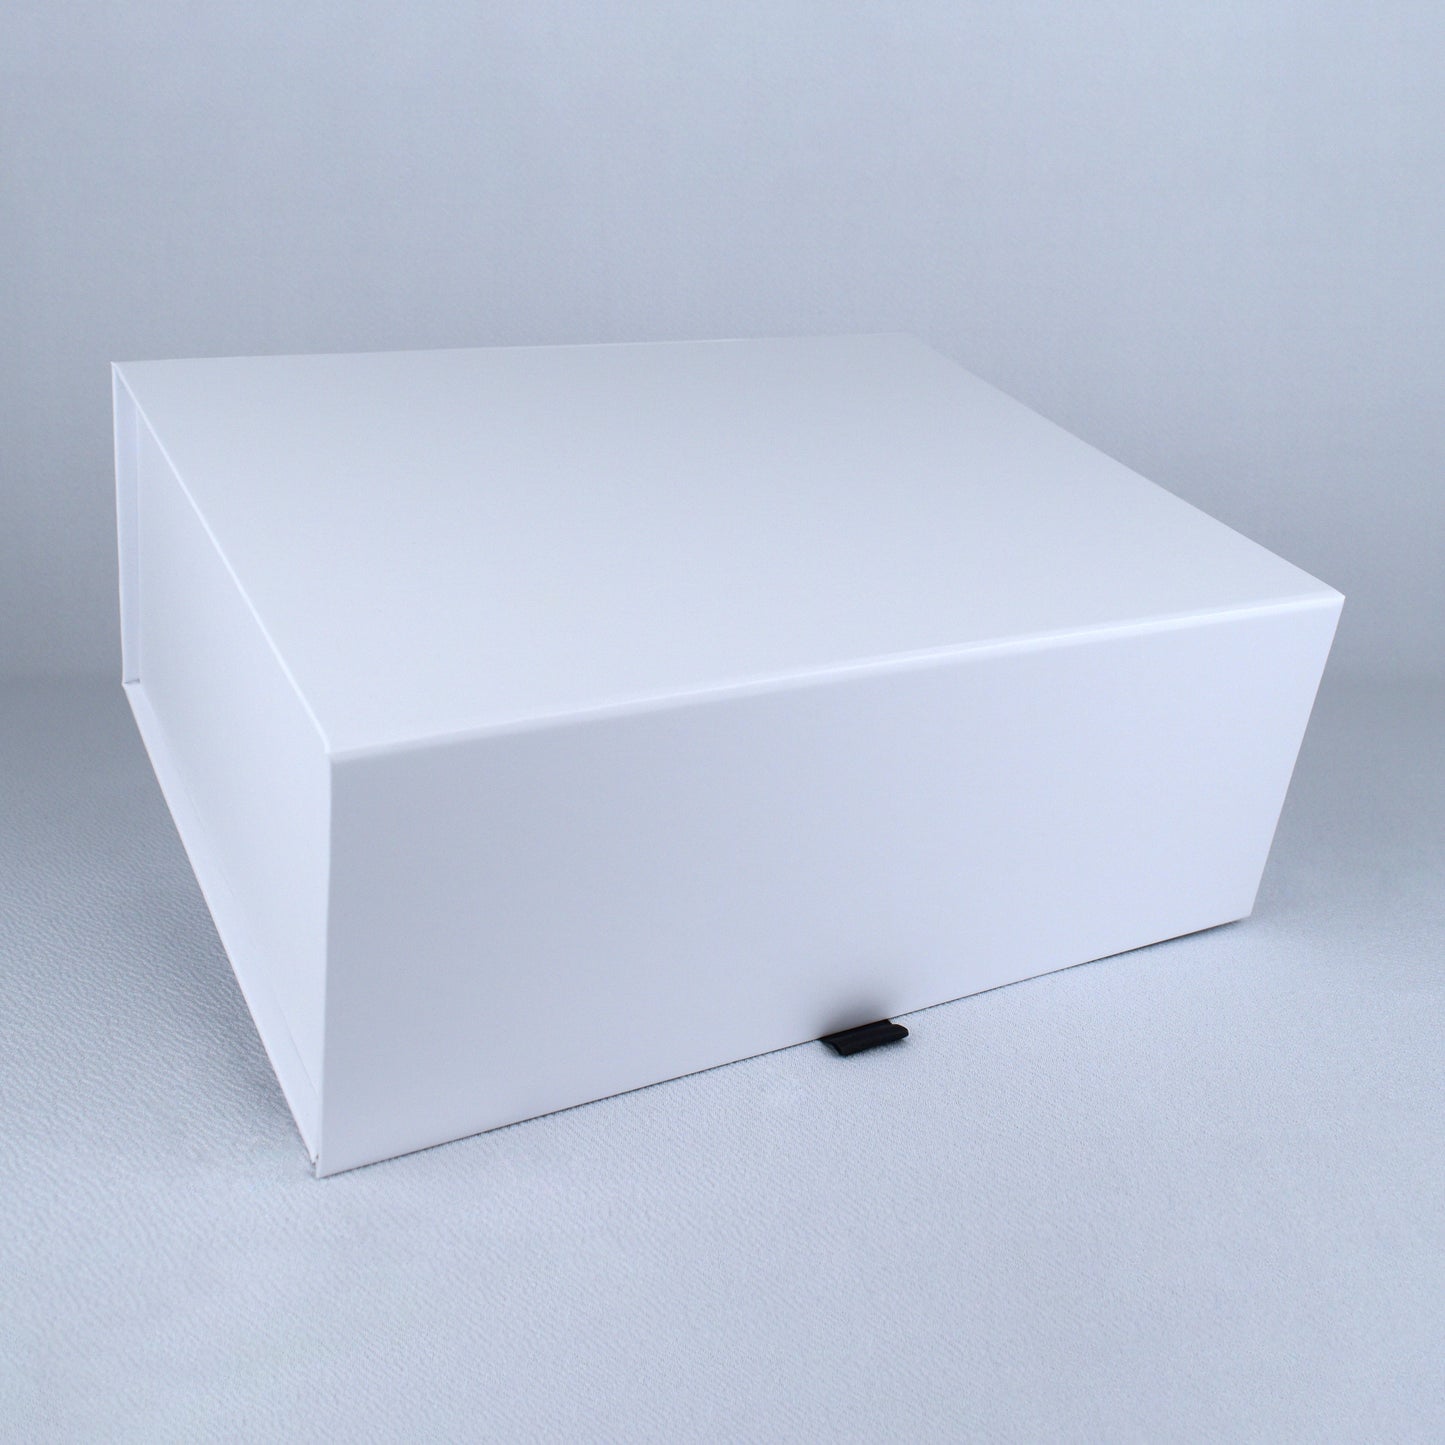 LARGE Premium Gift Box with Pull-Up Ribbon & Magnetic Closure (11" x 8.75" x 4.37")